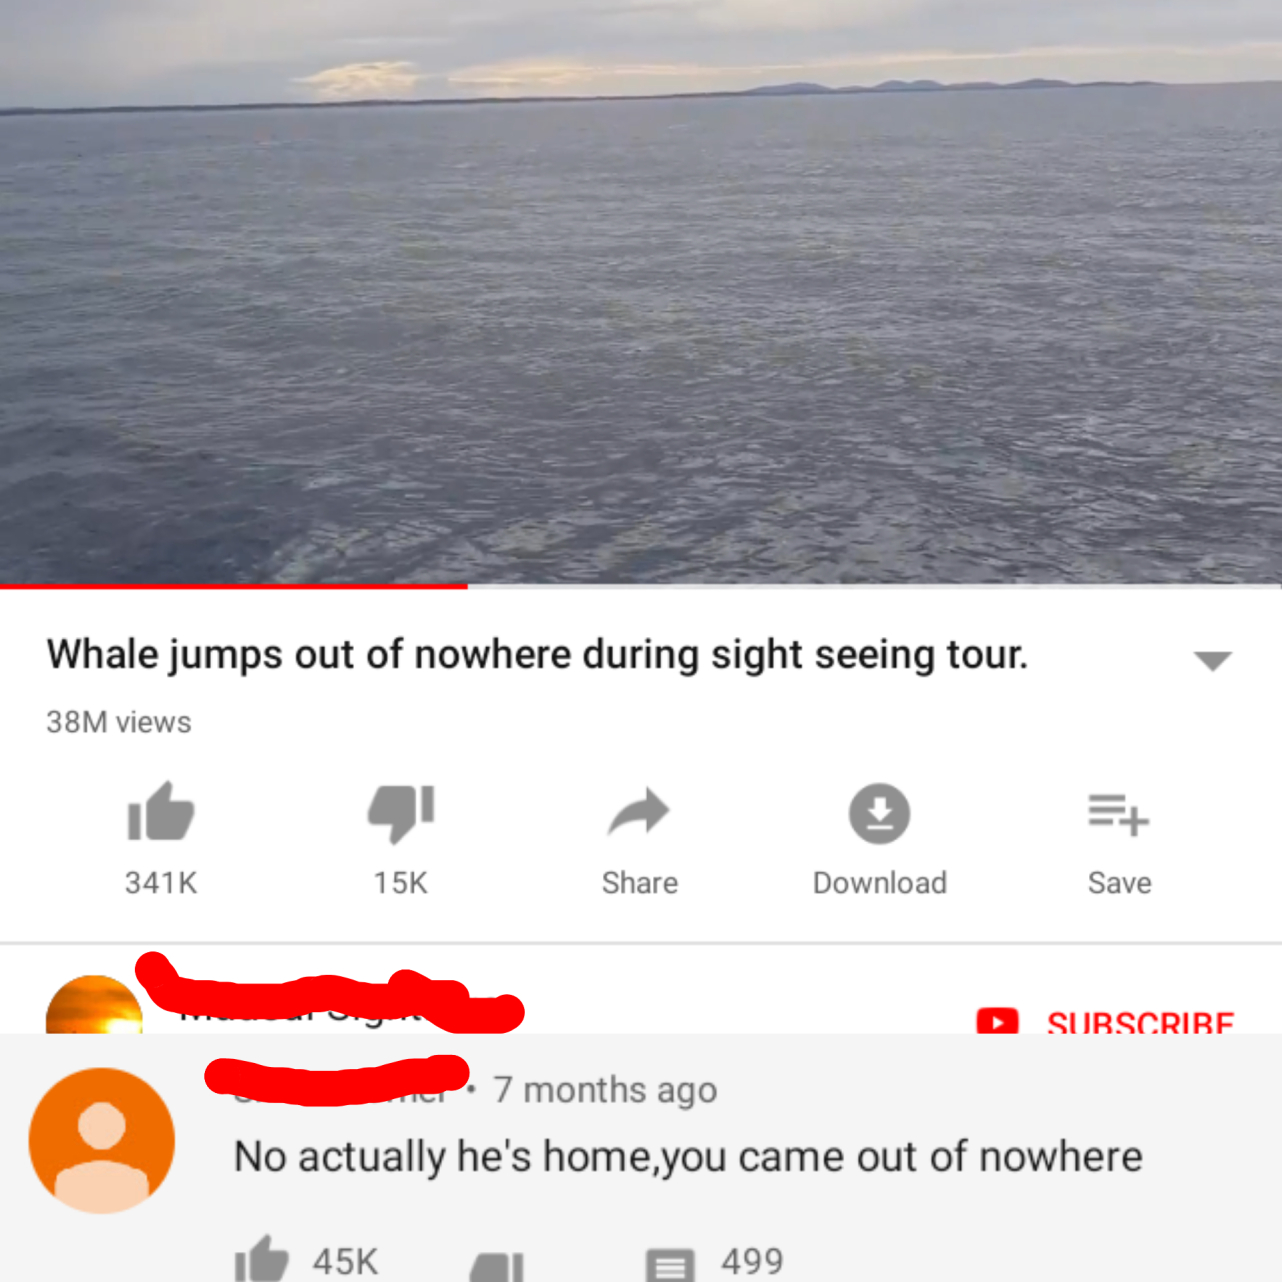 nearly shitted on myself at school - Whale jumps out of nowhere during sight seeing tour. 38M views 15K Download Save D Surscrire 7 months ago No actually he's home,you came out of nowhere 45K 499